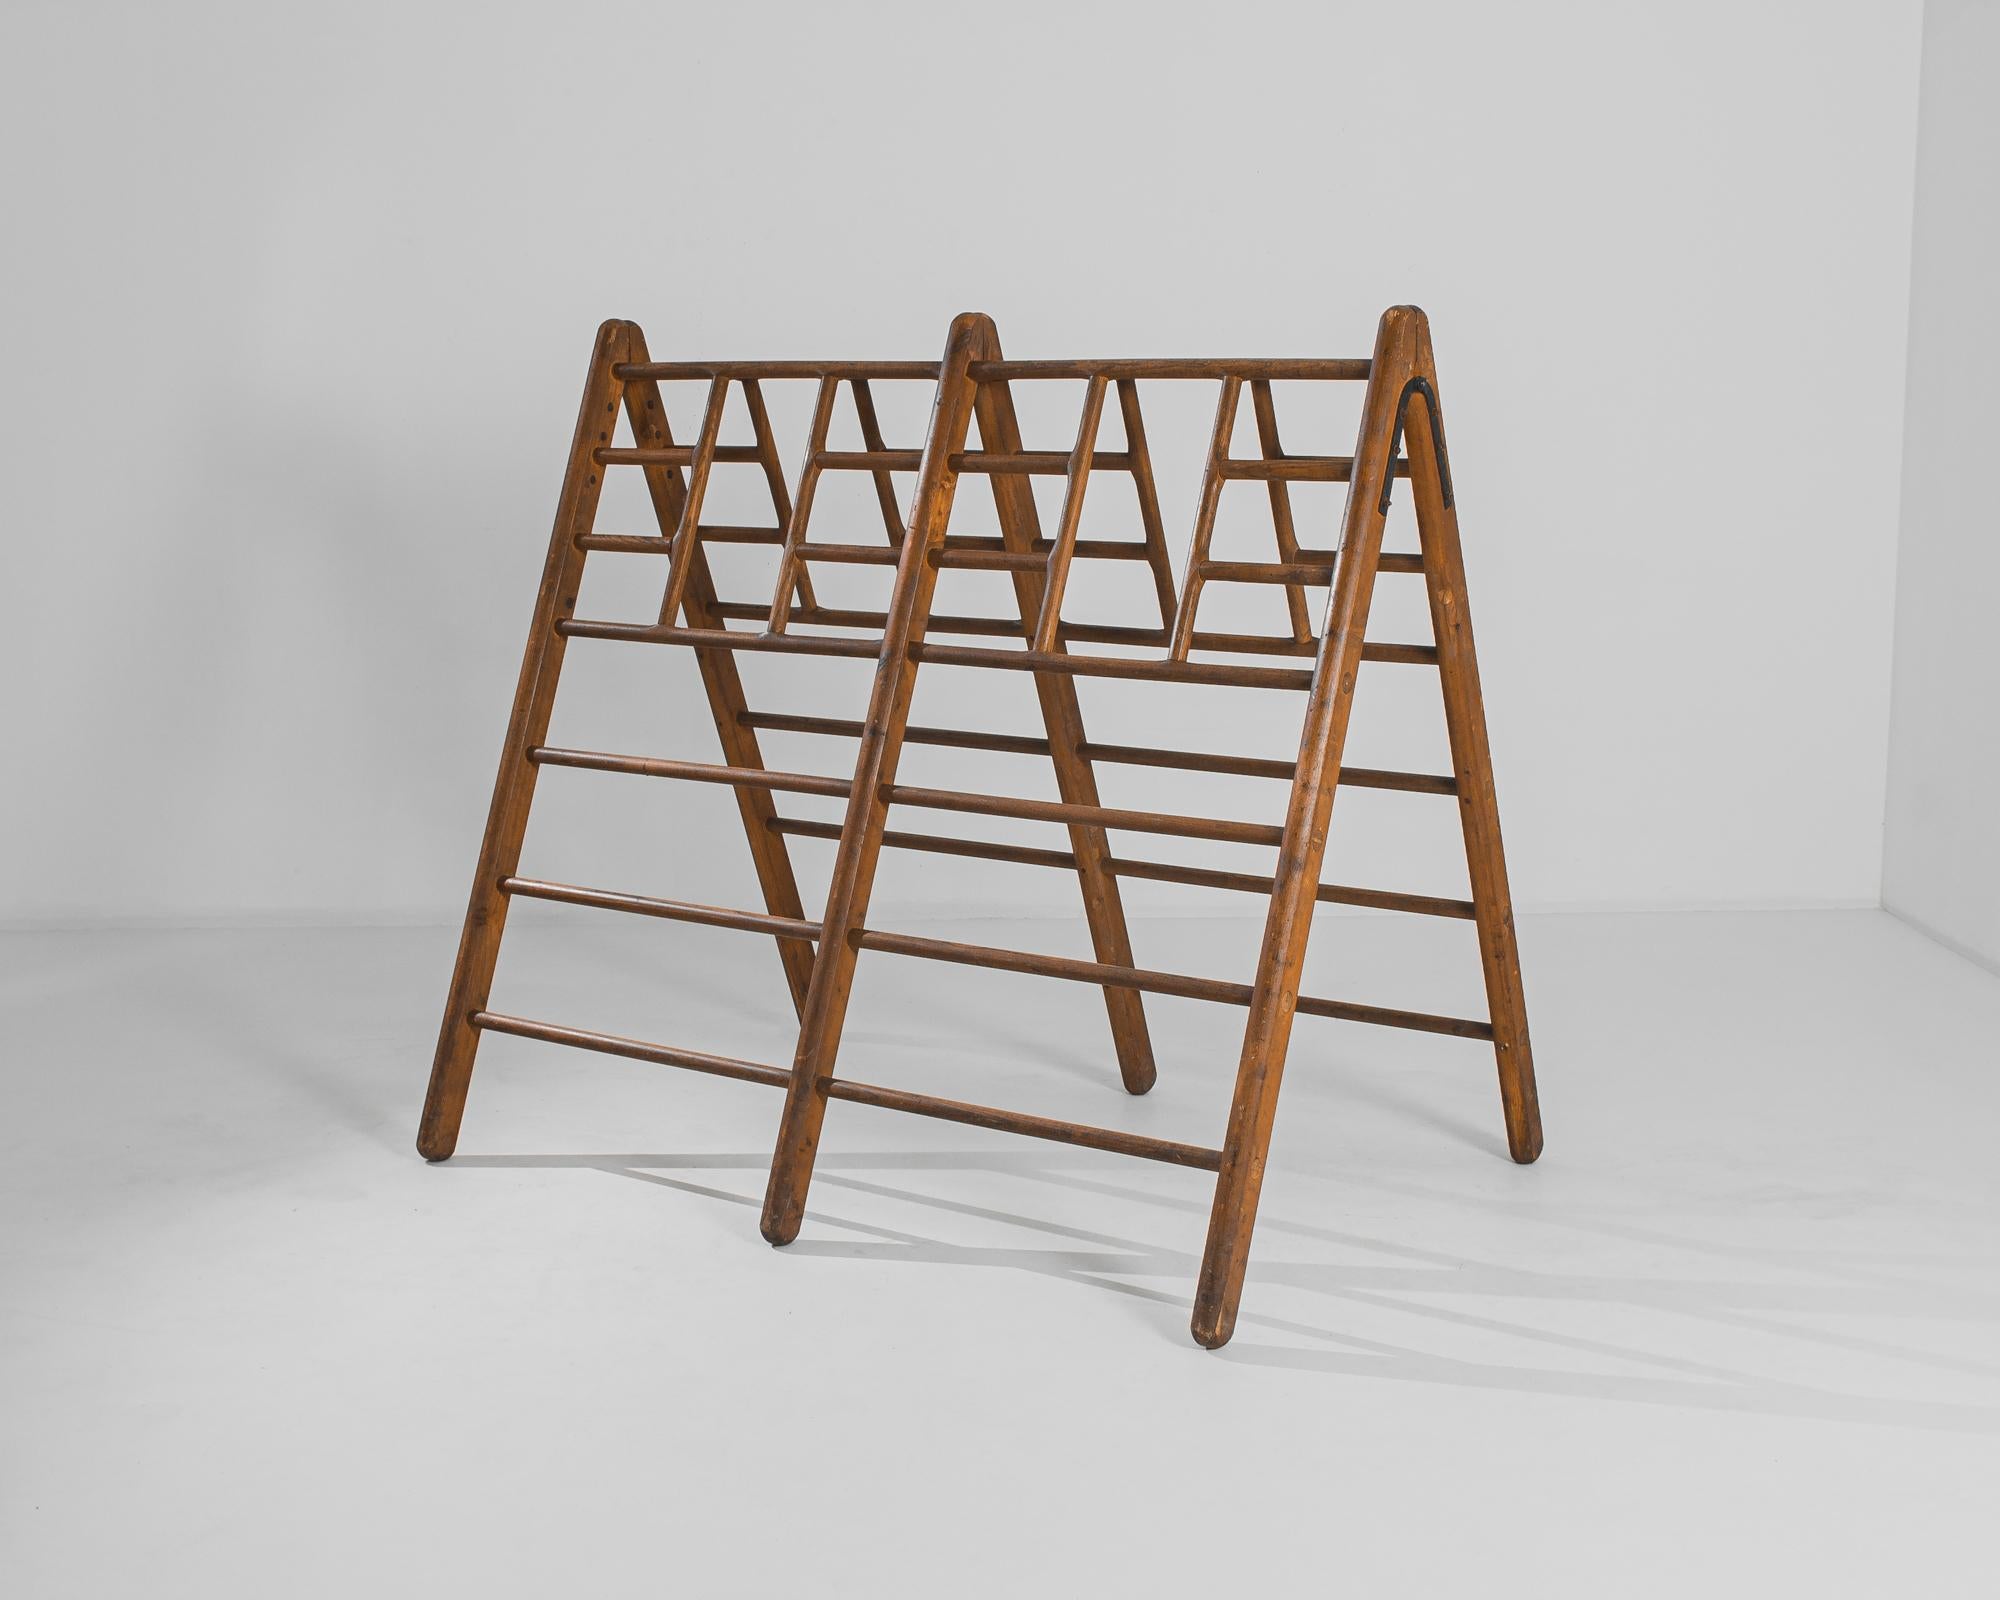 This wooden children's gym was made in the former Czechoslovakia, circa 1940. Featuring a geometric silhouette with gridded bars, the A-framed structure can be adapted for a plethora of uses, from a rack to a sculptural display piece. With its